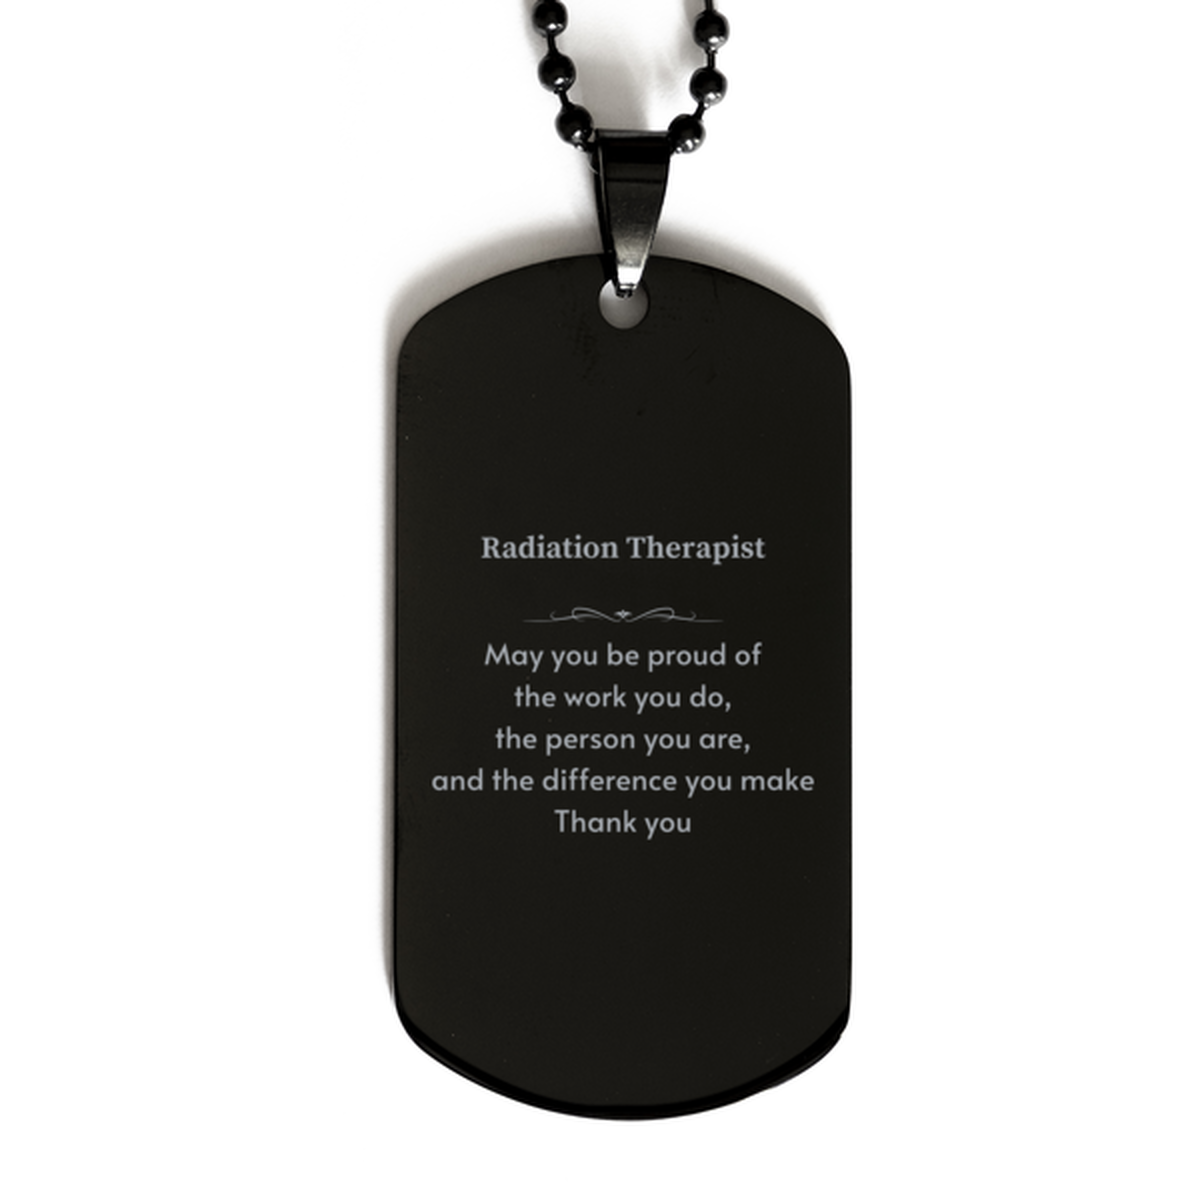 Heartwarming Black Dog Tag Retirement Coworkers Gifts for Radiation Therapist, Radiation Therapist May You be proud of the work you do, the person you are Gifts for Boss Men Women Friends